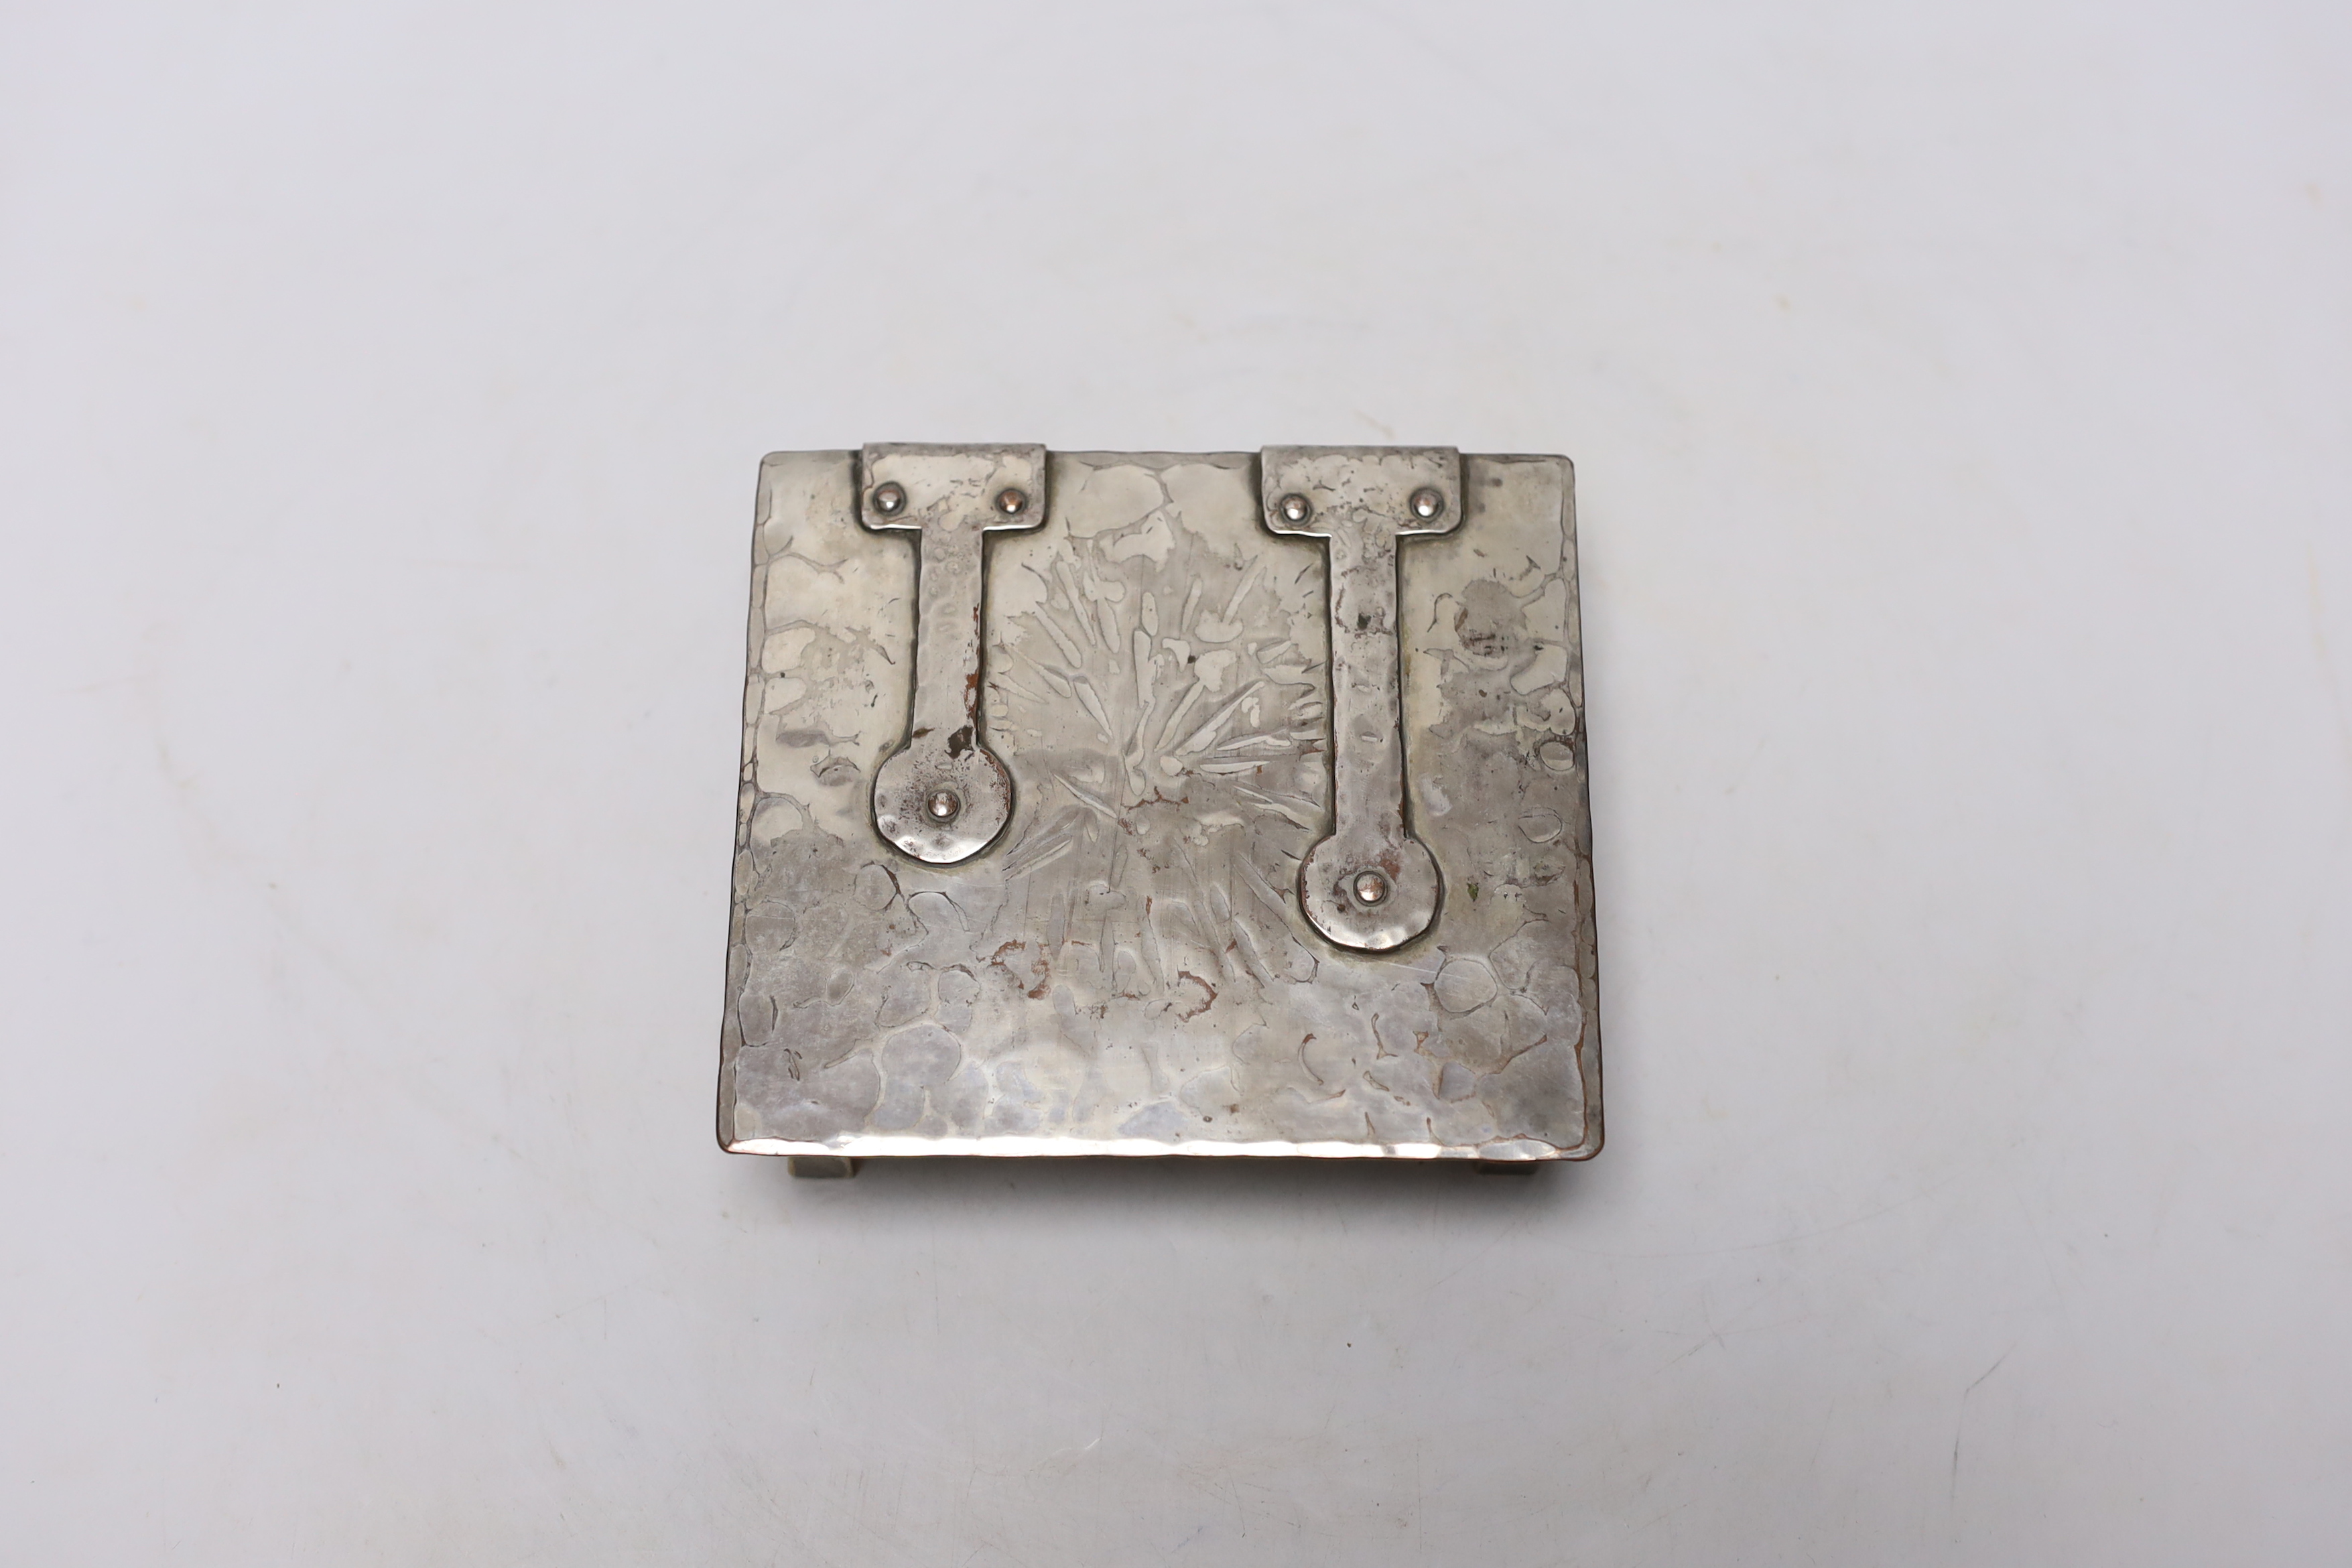 An Arts & Crafts silver plated box, with strap hinges and hammered finish, 13 x 11.5 x 4cm